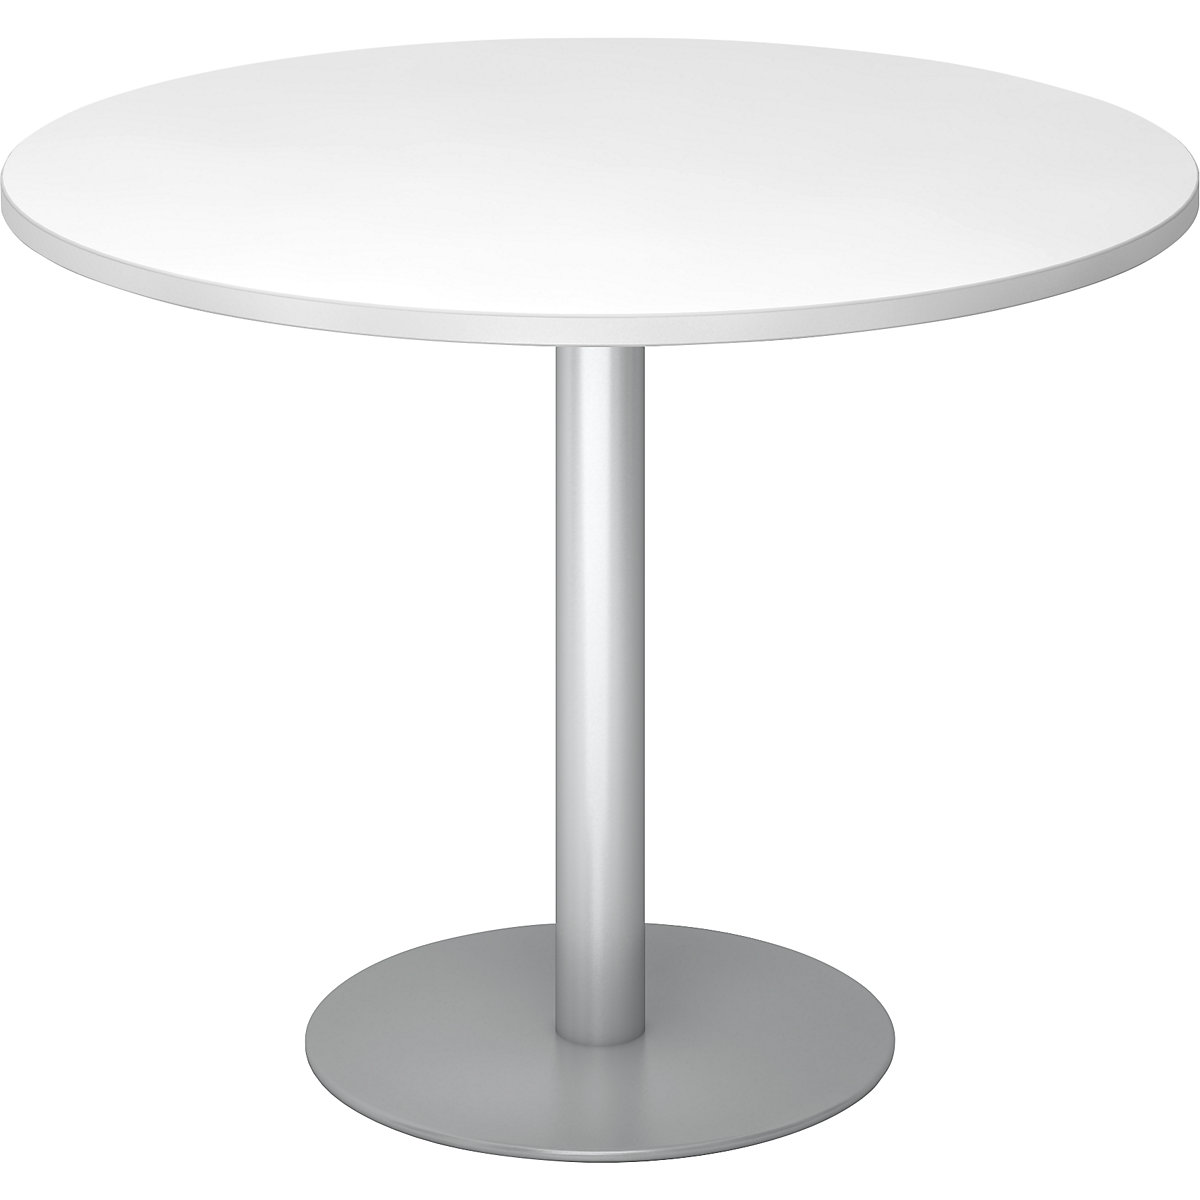 Conference table, Ø 1000 mm, 755 mm high, silver frame, tabletop in white-7